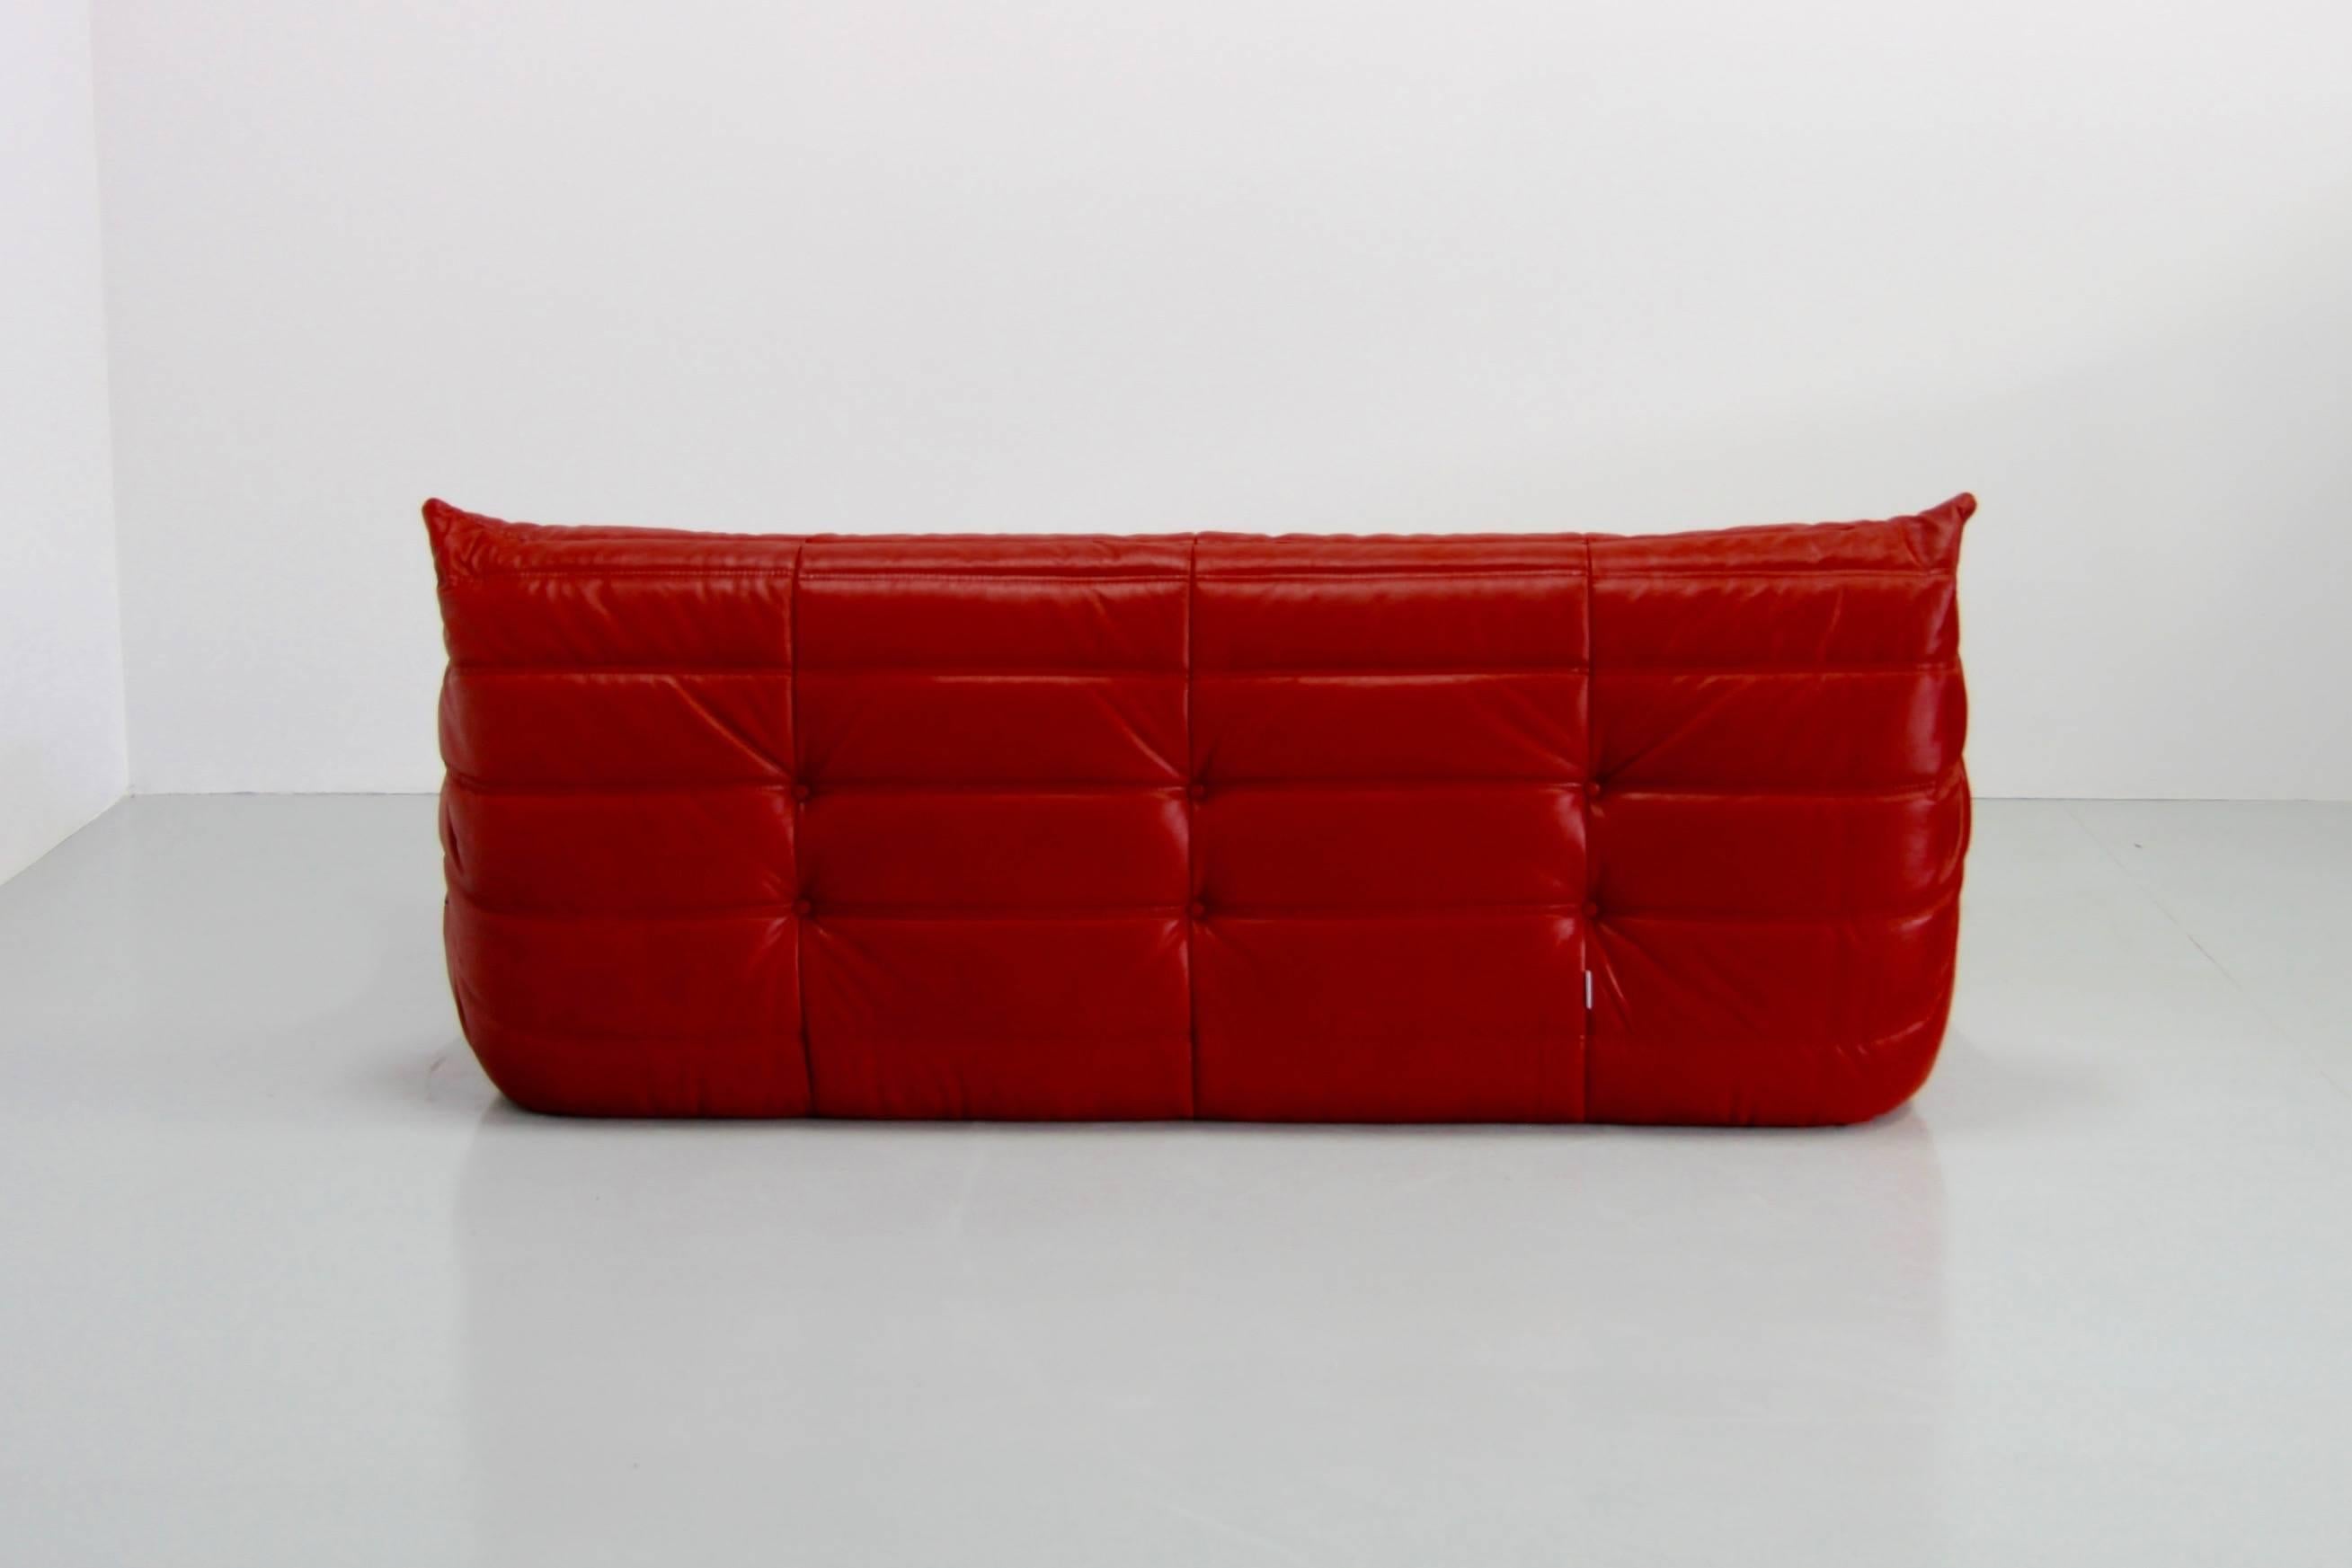 French Red Leather Togo Sofa by Michel Ducaroy for Ligne Roset, 1974, Red Leather Togo